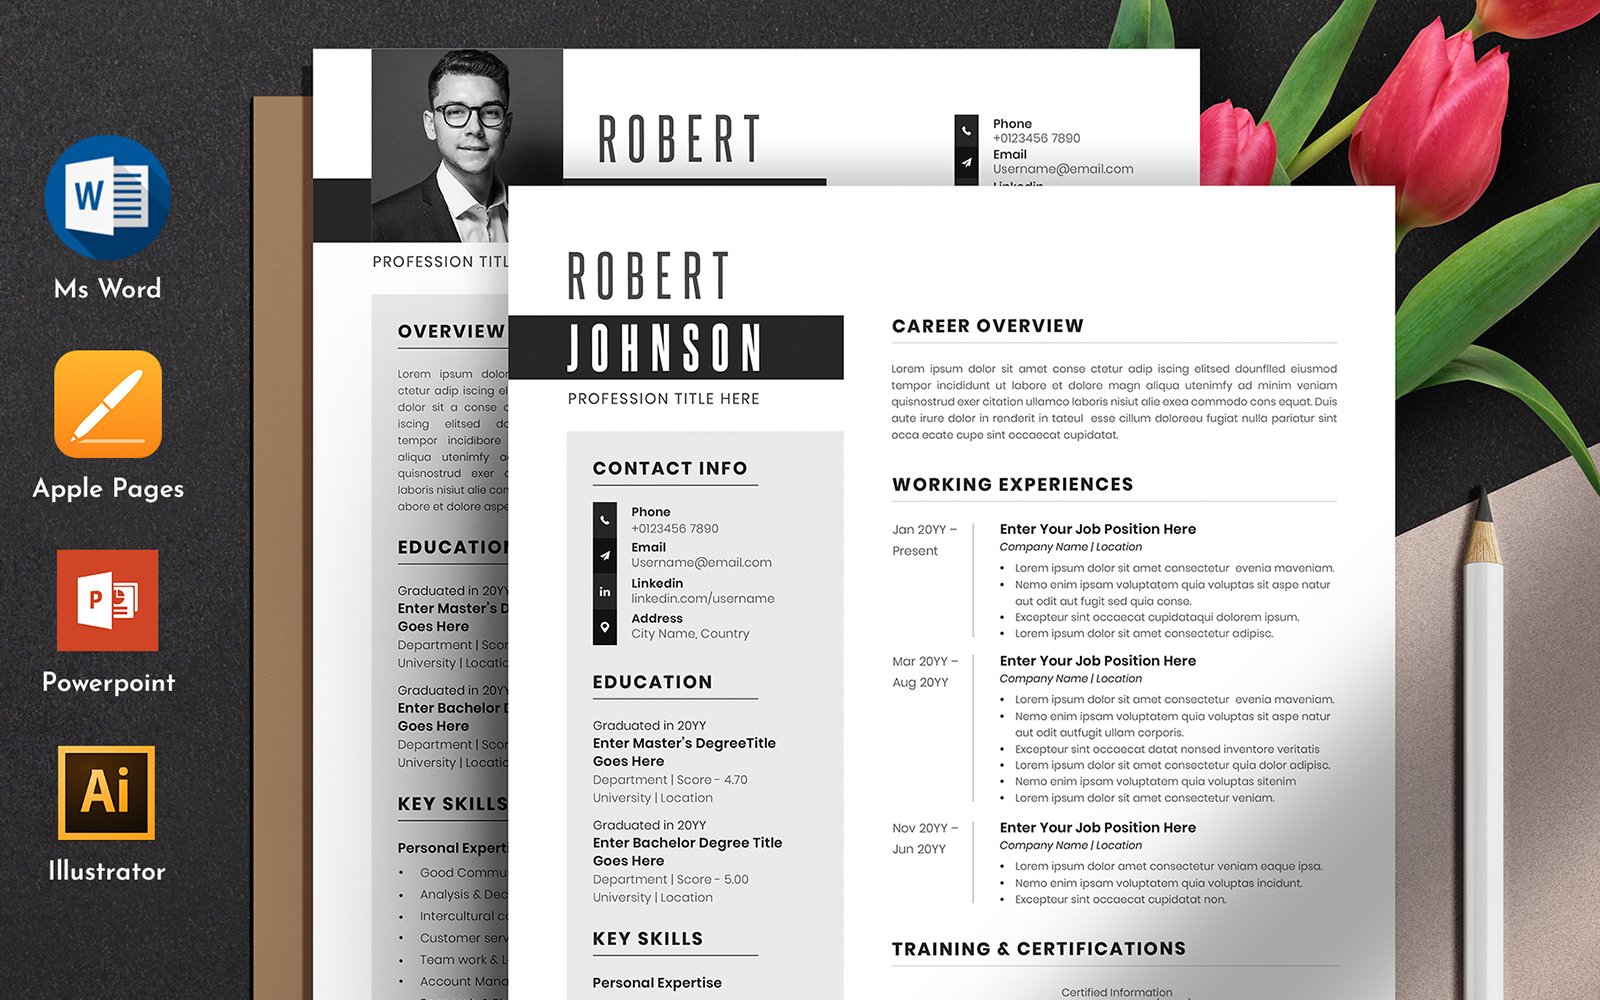 Clean & Professional Resume CV Template With Ms Word Apple Pages File Format